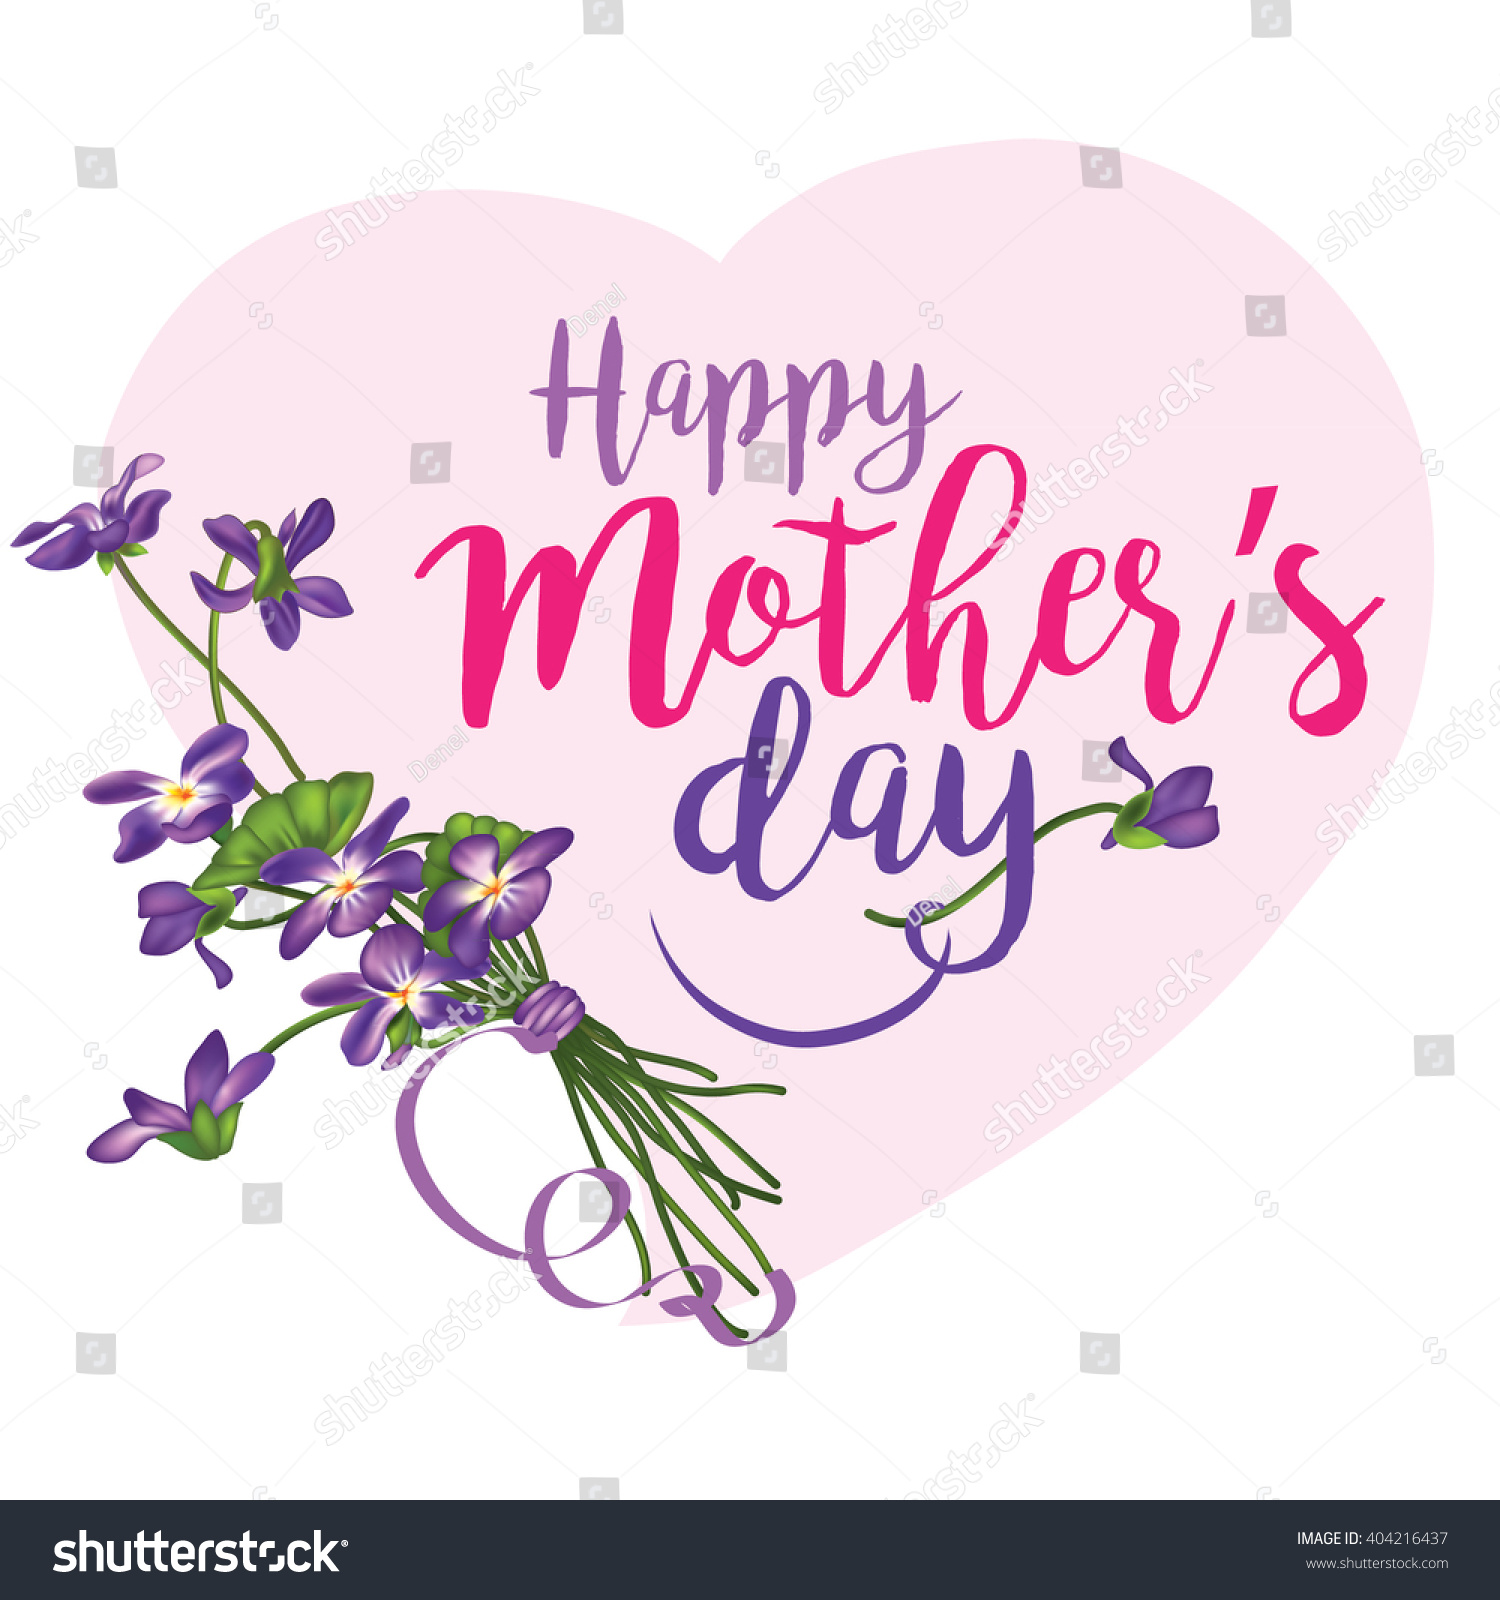 free christian mothers day clipart - photo #45